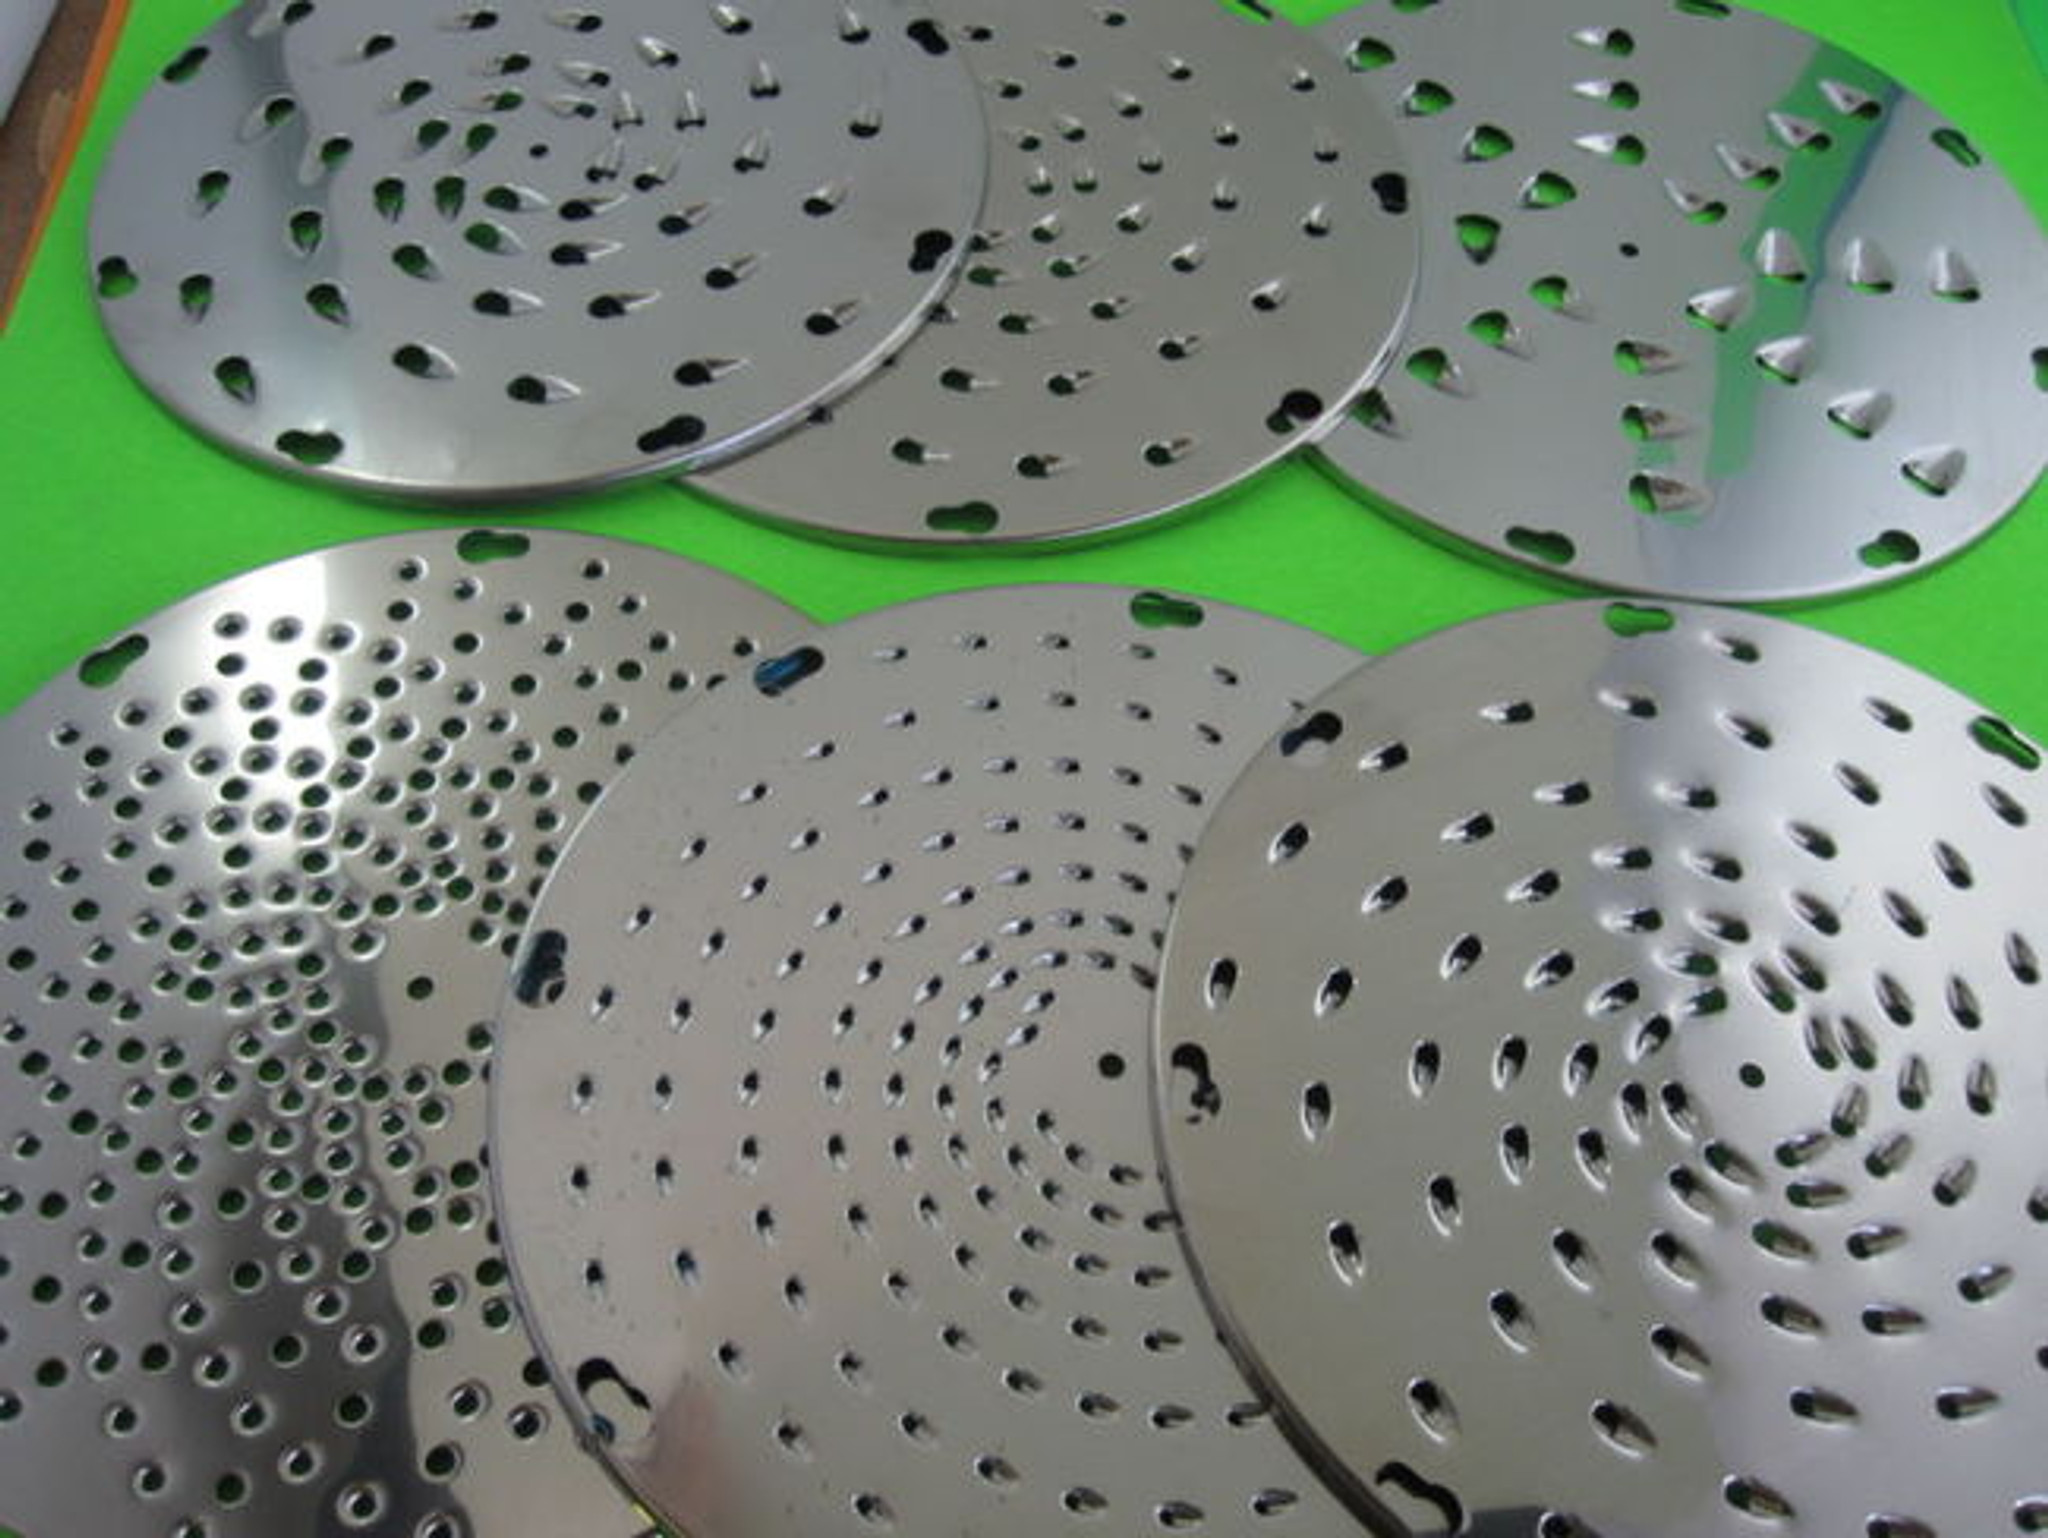 Hobart GRATE-CHEESE, Hard Cheese Grater Plate